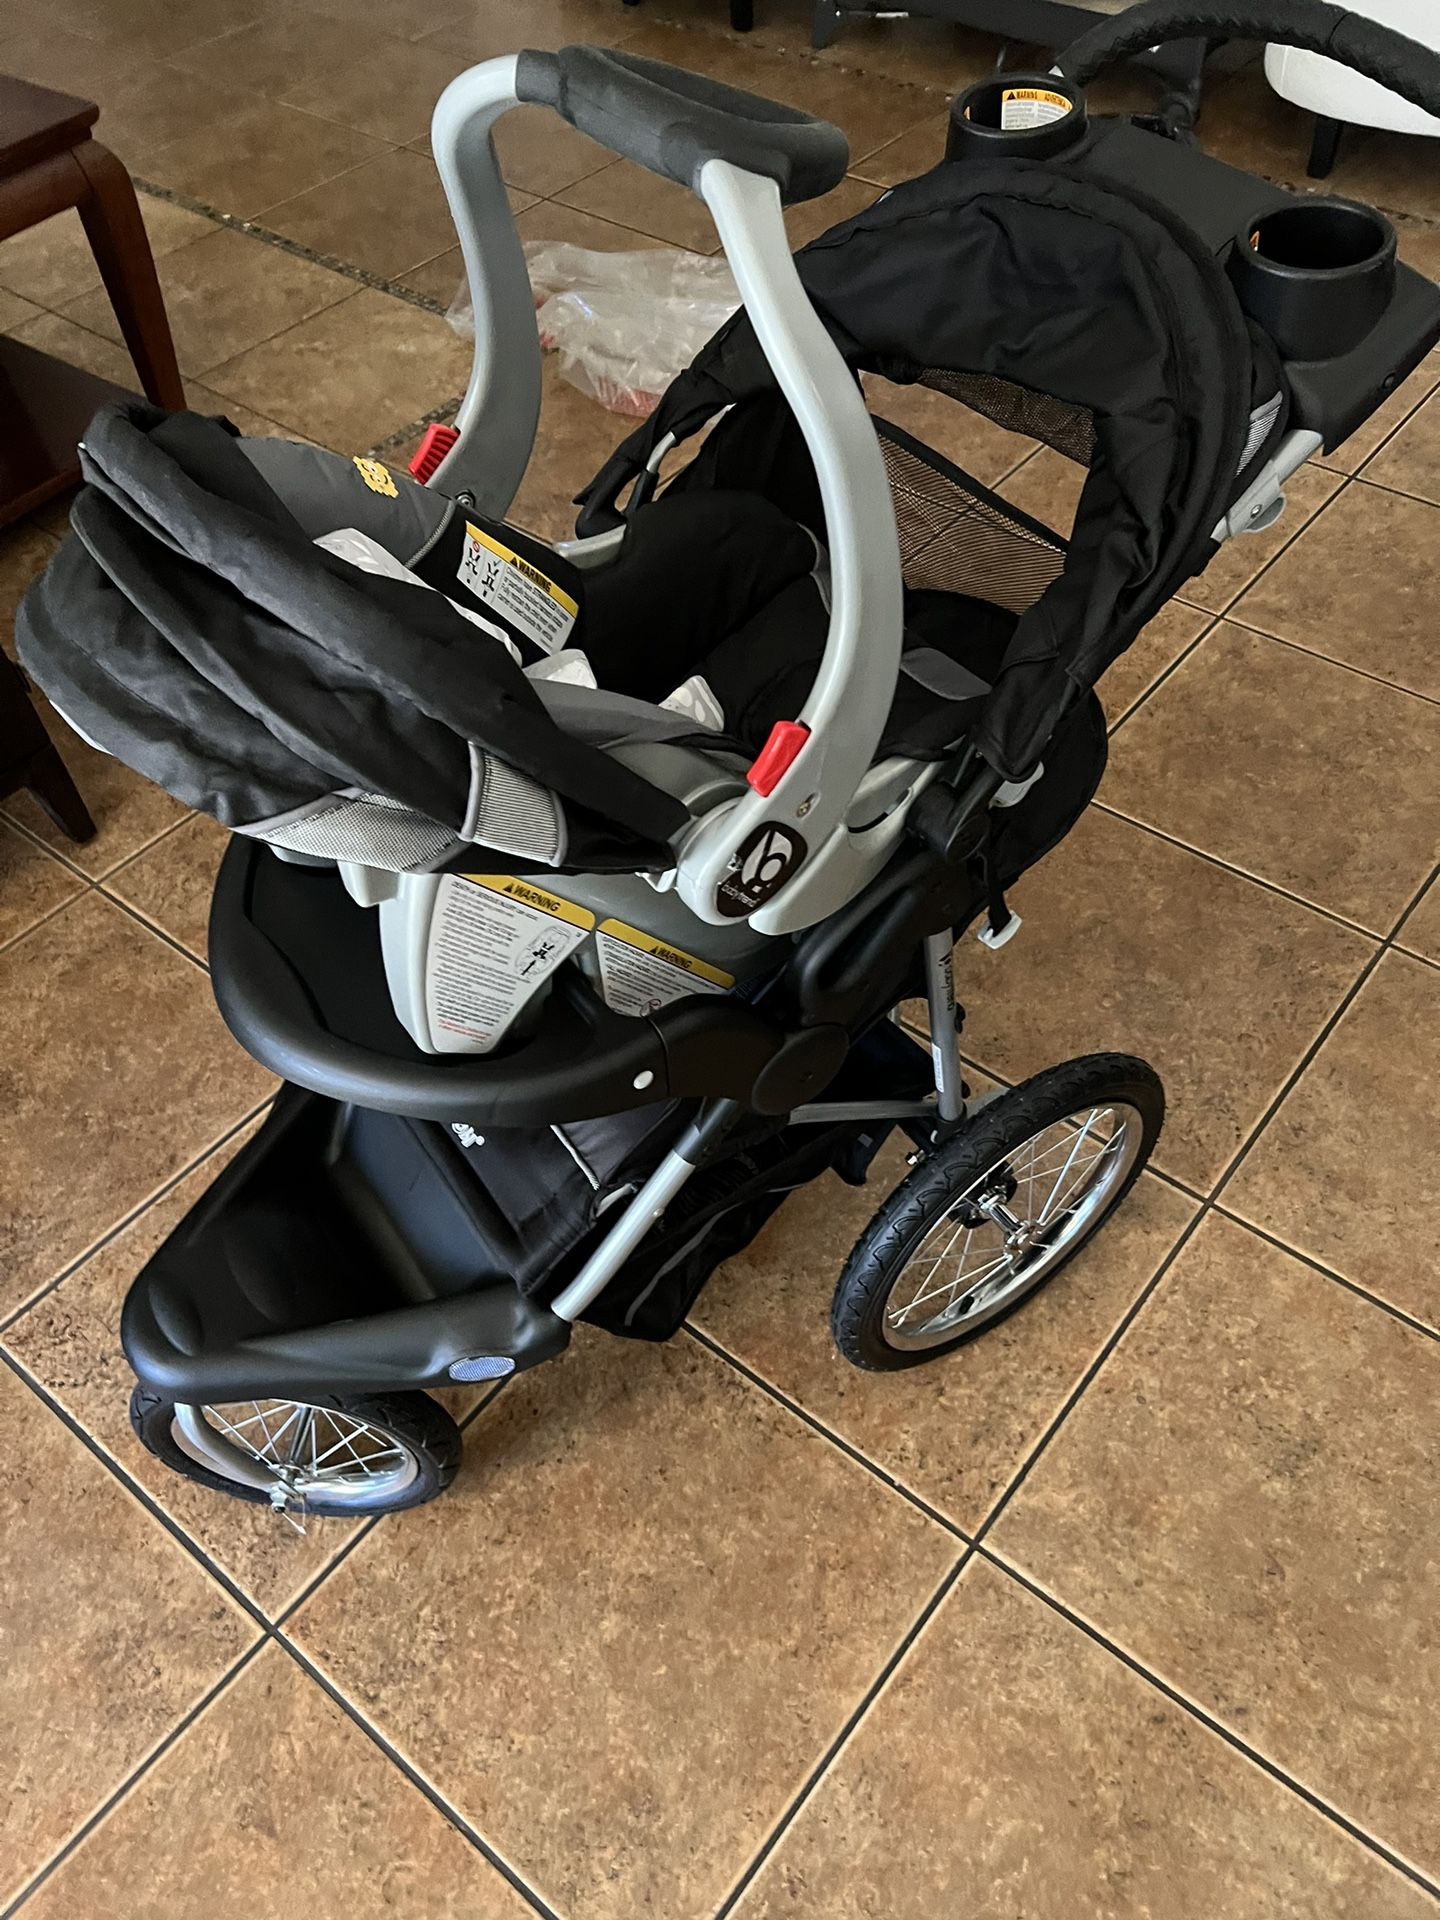  Baby Trend Expedition DLX Jogger Travel System with EZ-Lift Plus Infant Car Seat  